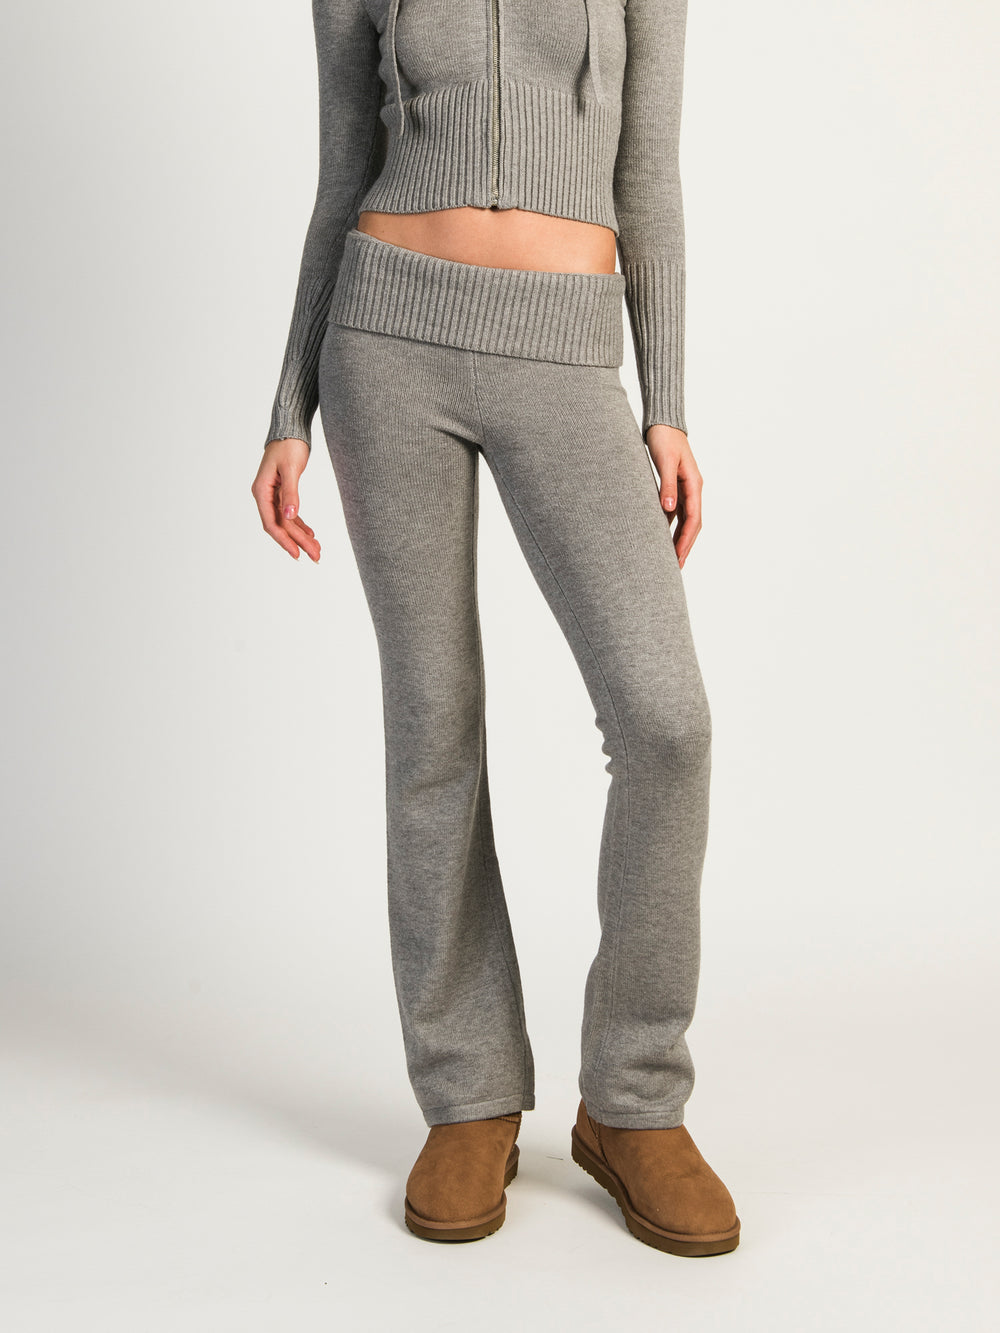 Bell Bottom Pants for Women - Up to 60% off